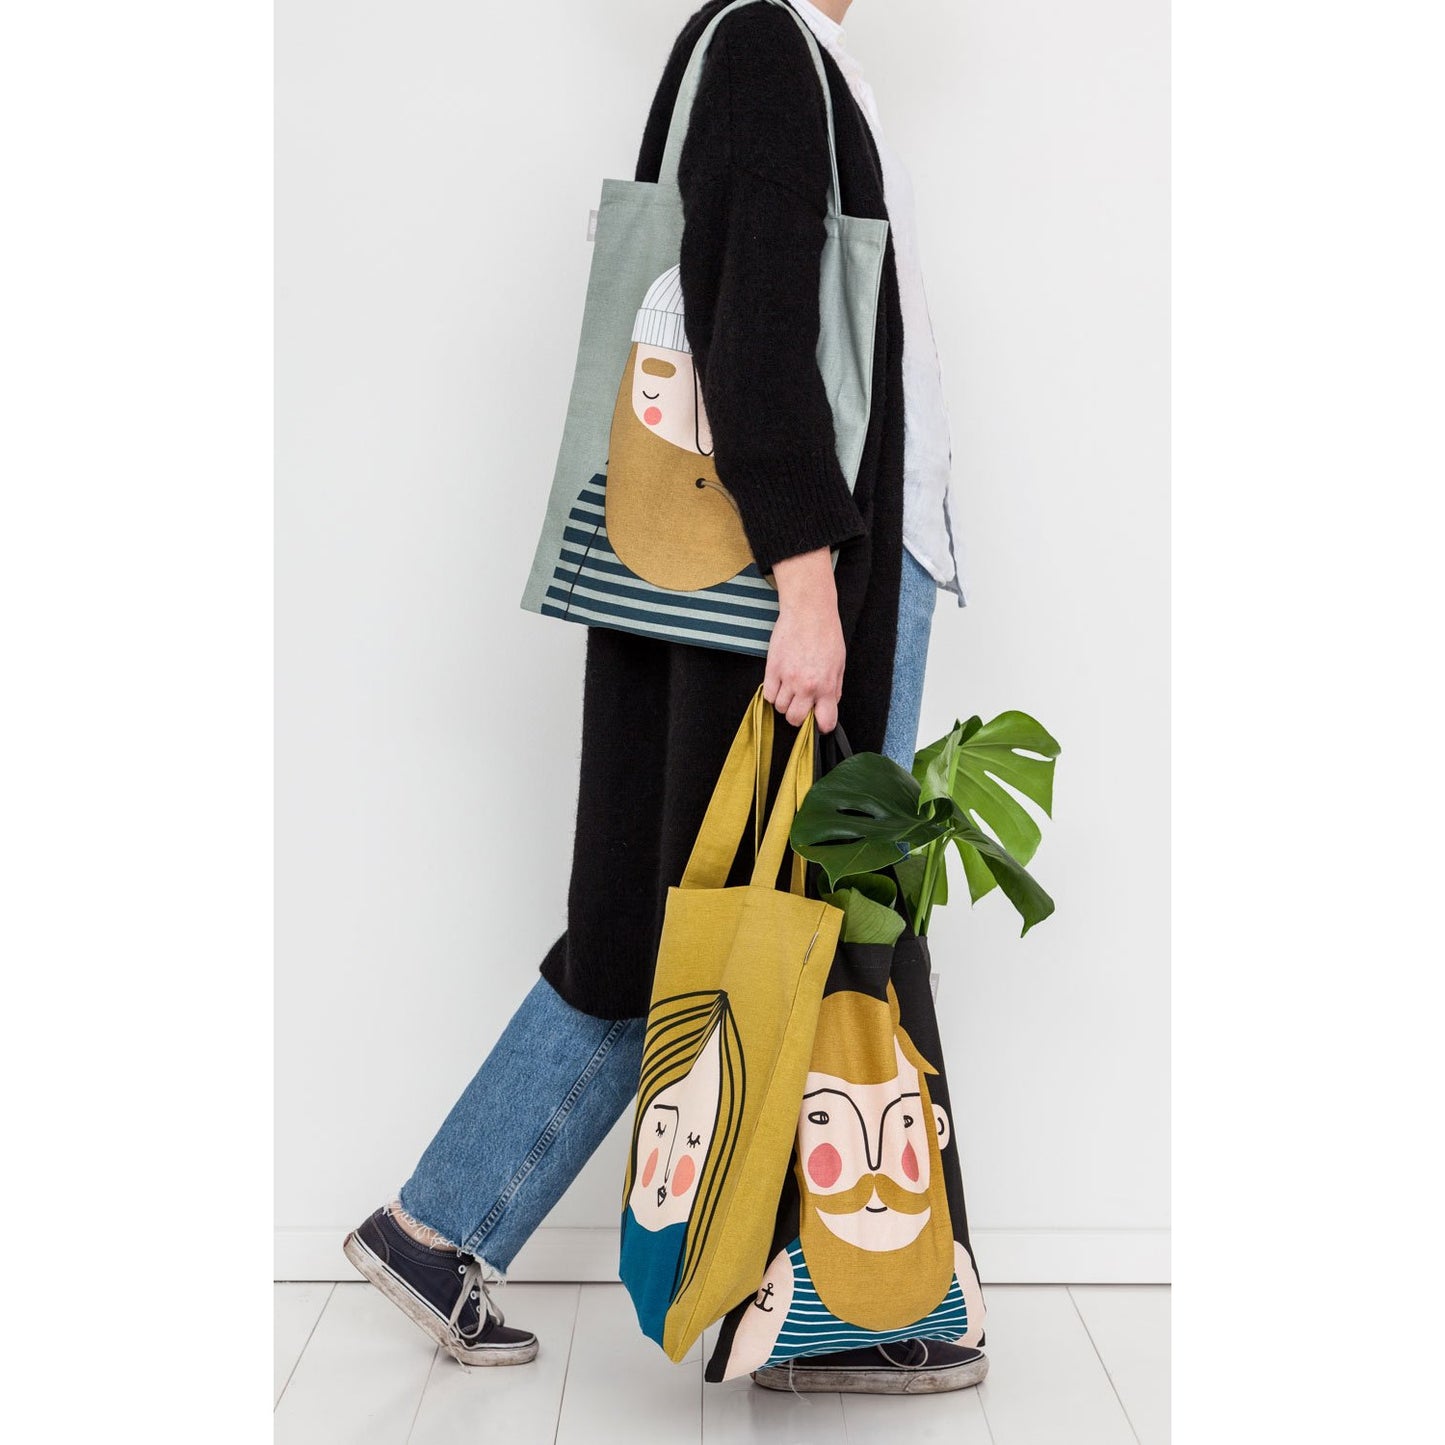 Women in jeans and long black cardigan carrying three tote bags with faces on them.